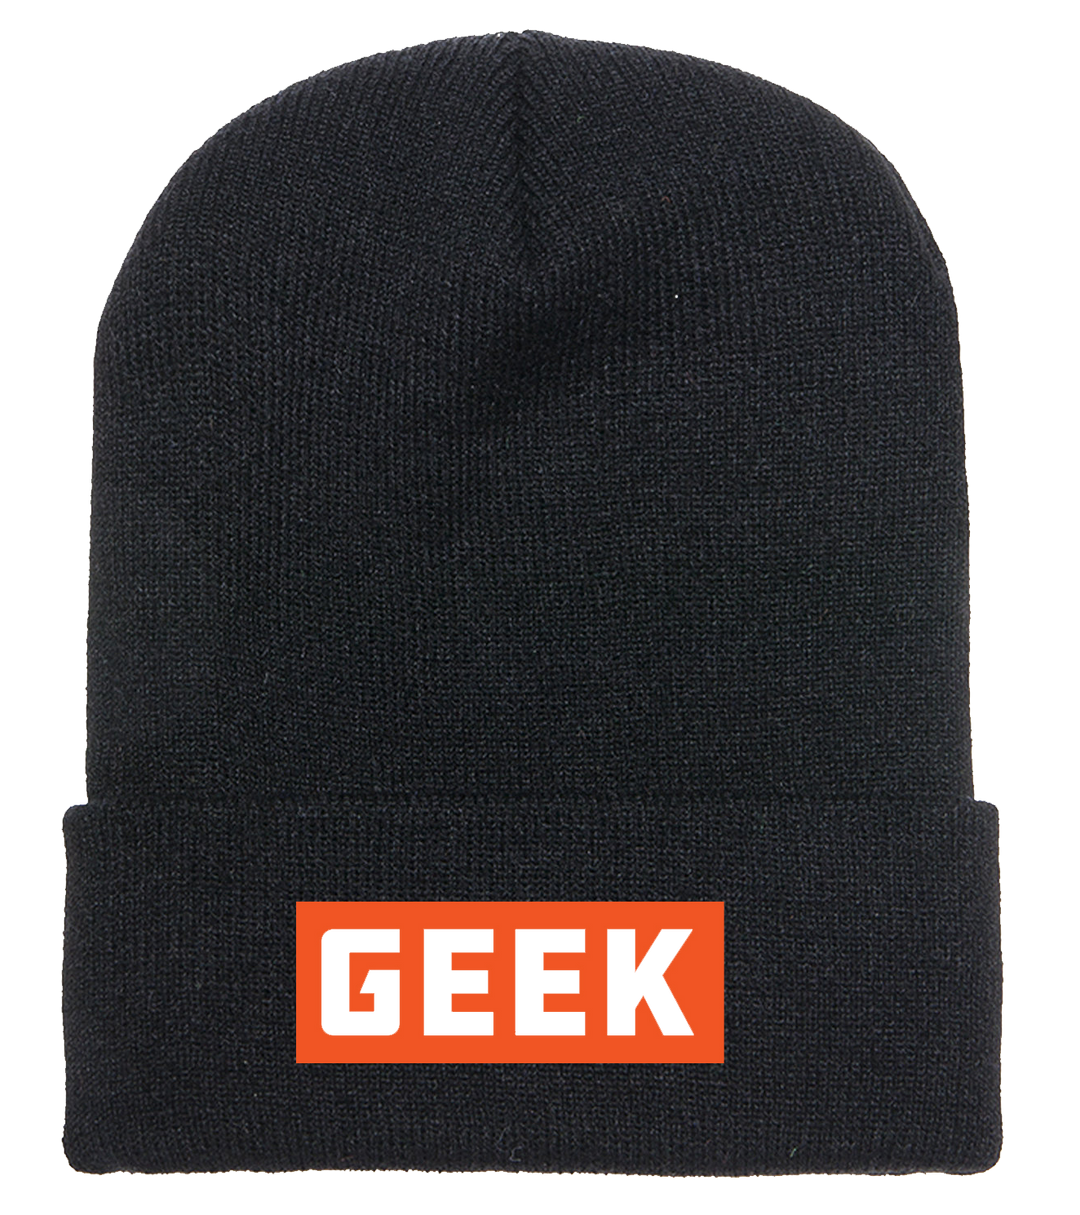 A photo of a black, knit ski cap with a orange embroidered label that contains the word GEEK stitched in white. 